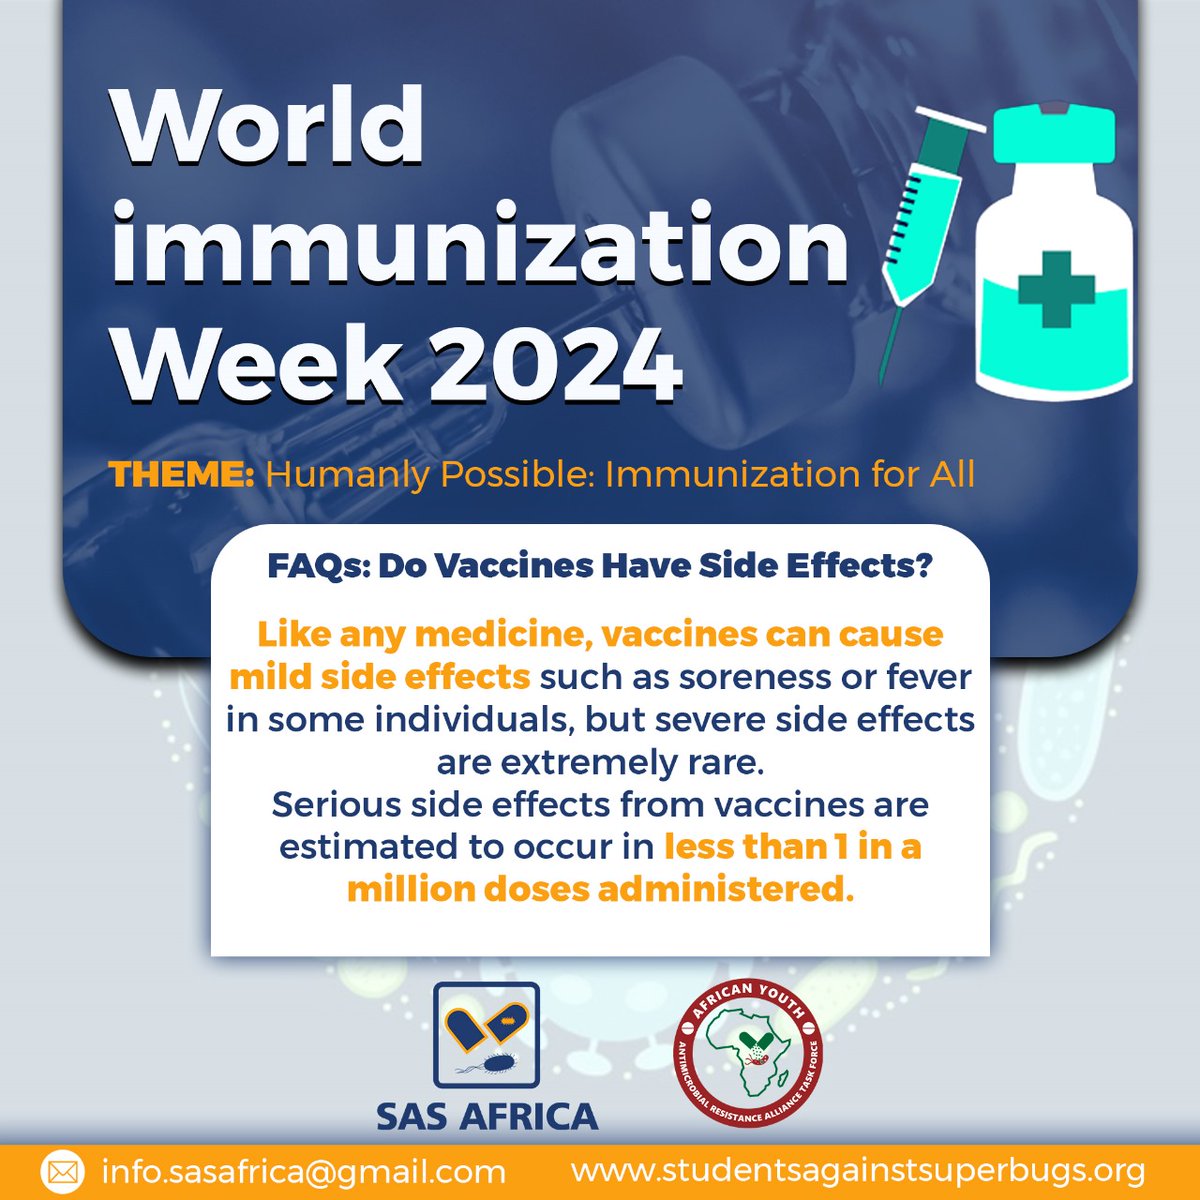 Like any other drug, vaccines have side mild effects that resolve only sholtly. Ask your #Pharmacist how to manage such side effects for your comfort post-immunization. Do not fear! #HumanlyPossible: Immunization for All @Danteh95380210 @NkaiwuateiJimmy